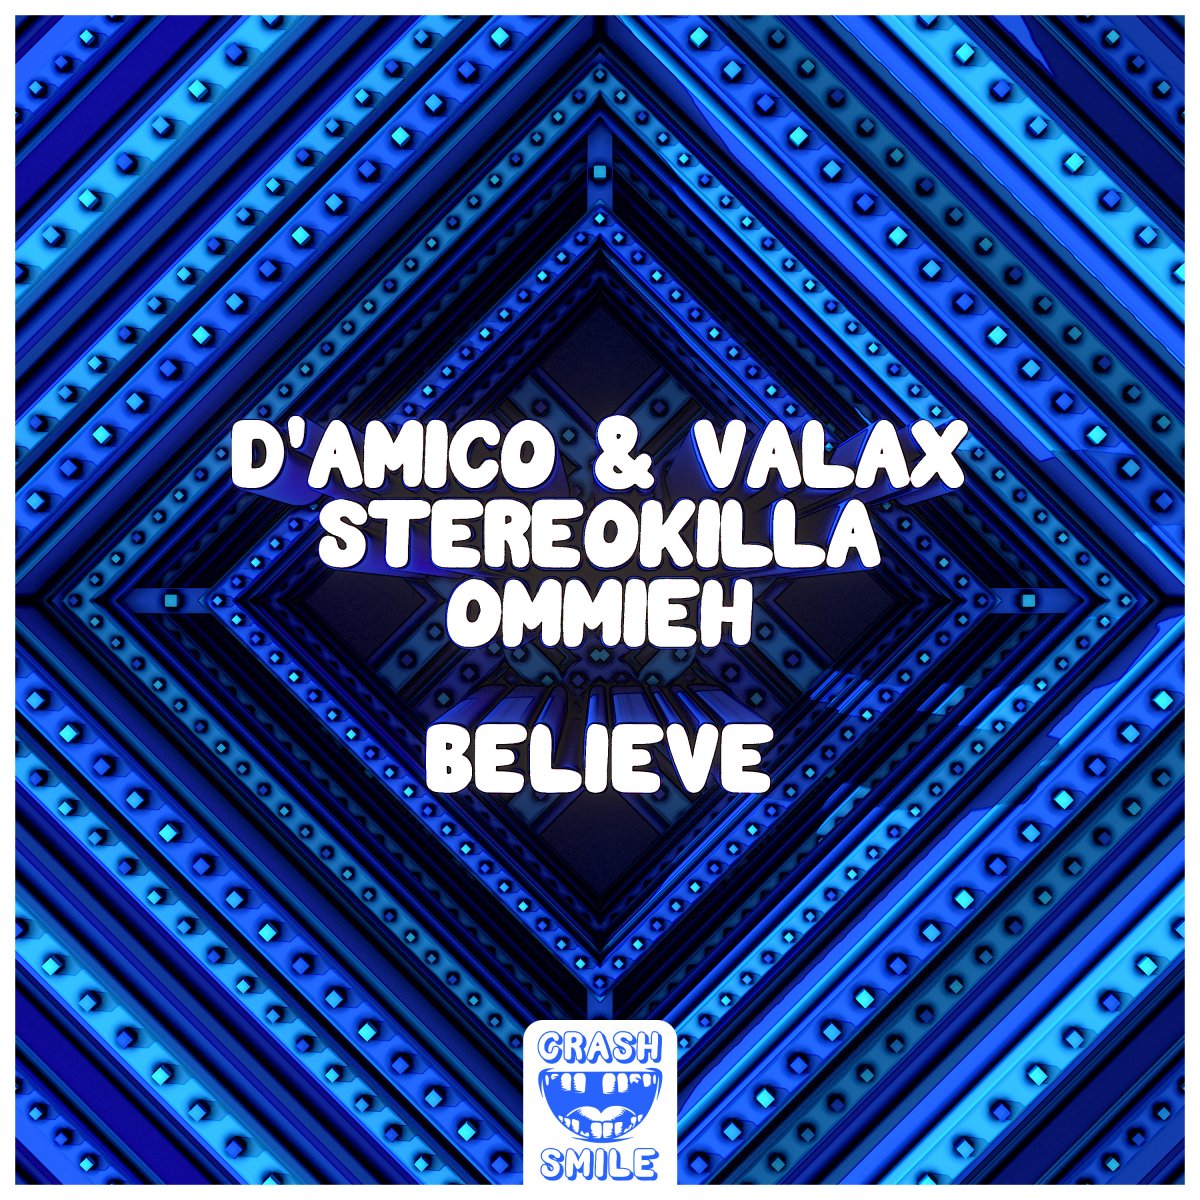 Believe - D'Amico & Valax⁠, StereoKilla⁠ & OMMIEH⁠ 